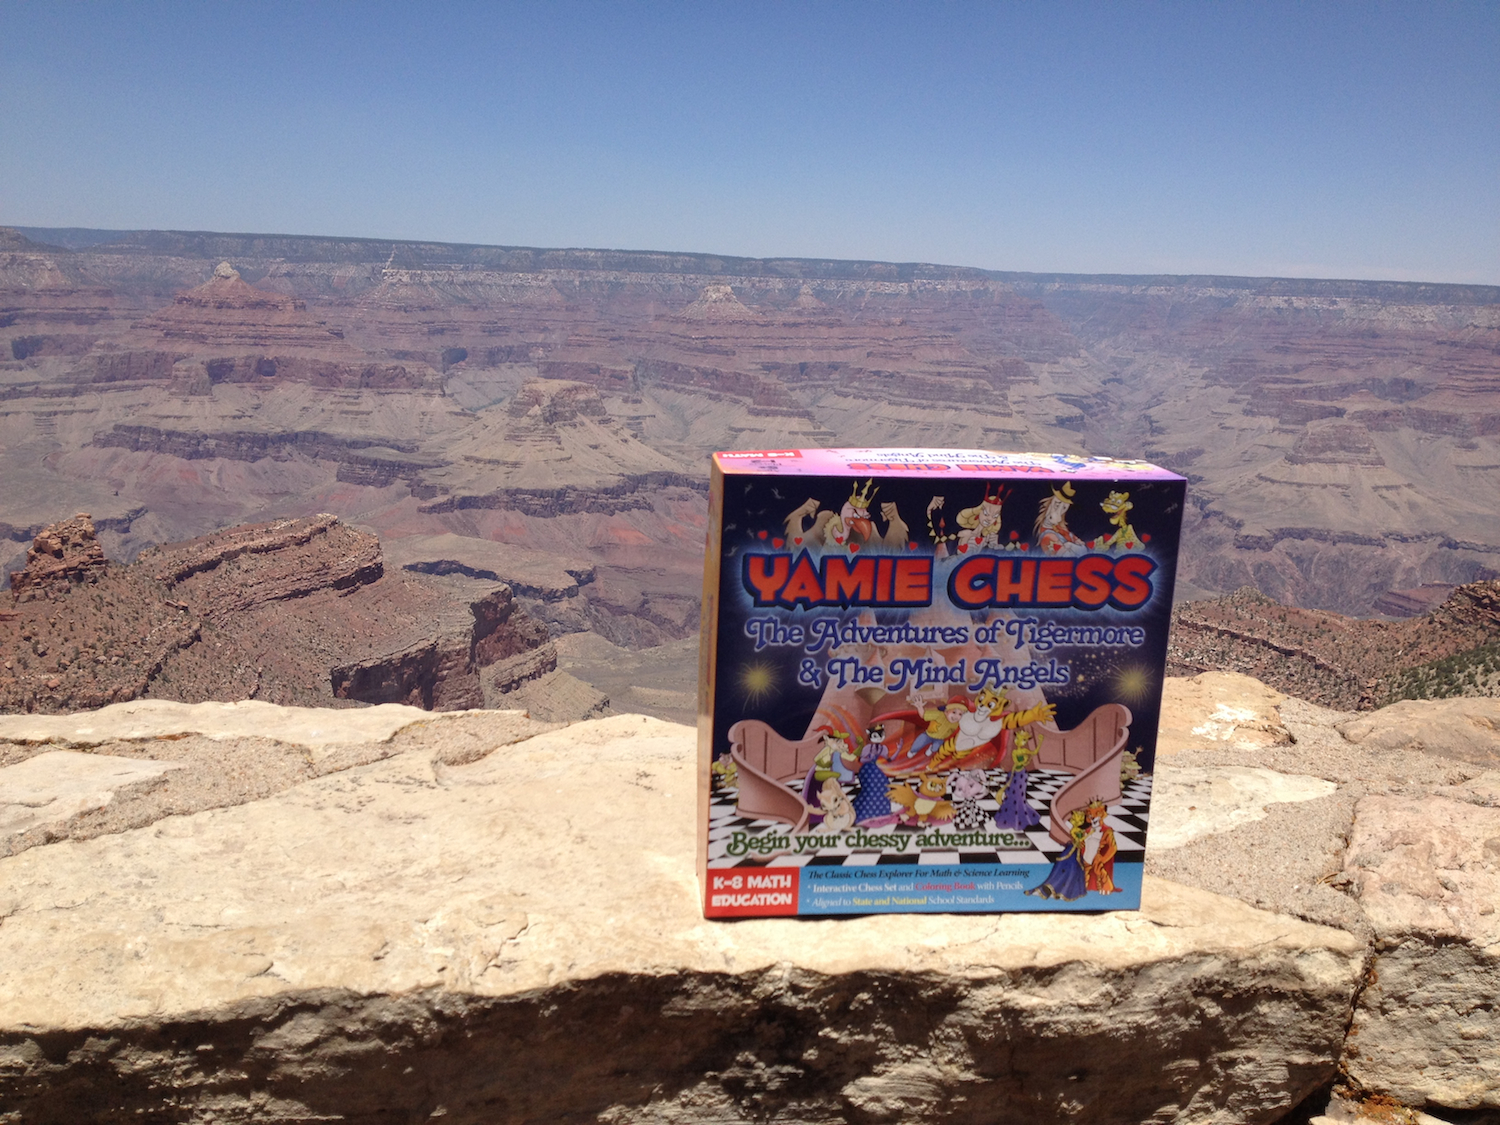 View of Yamie Chess overlooking Arizona's Grand Canyon where Bobby Fischer and Garry Kasparov's greatest chess games were re-enacted to bring attention to the power of chess for children's education